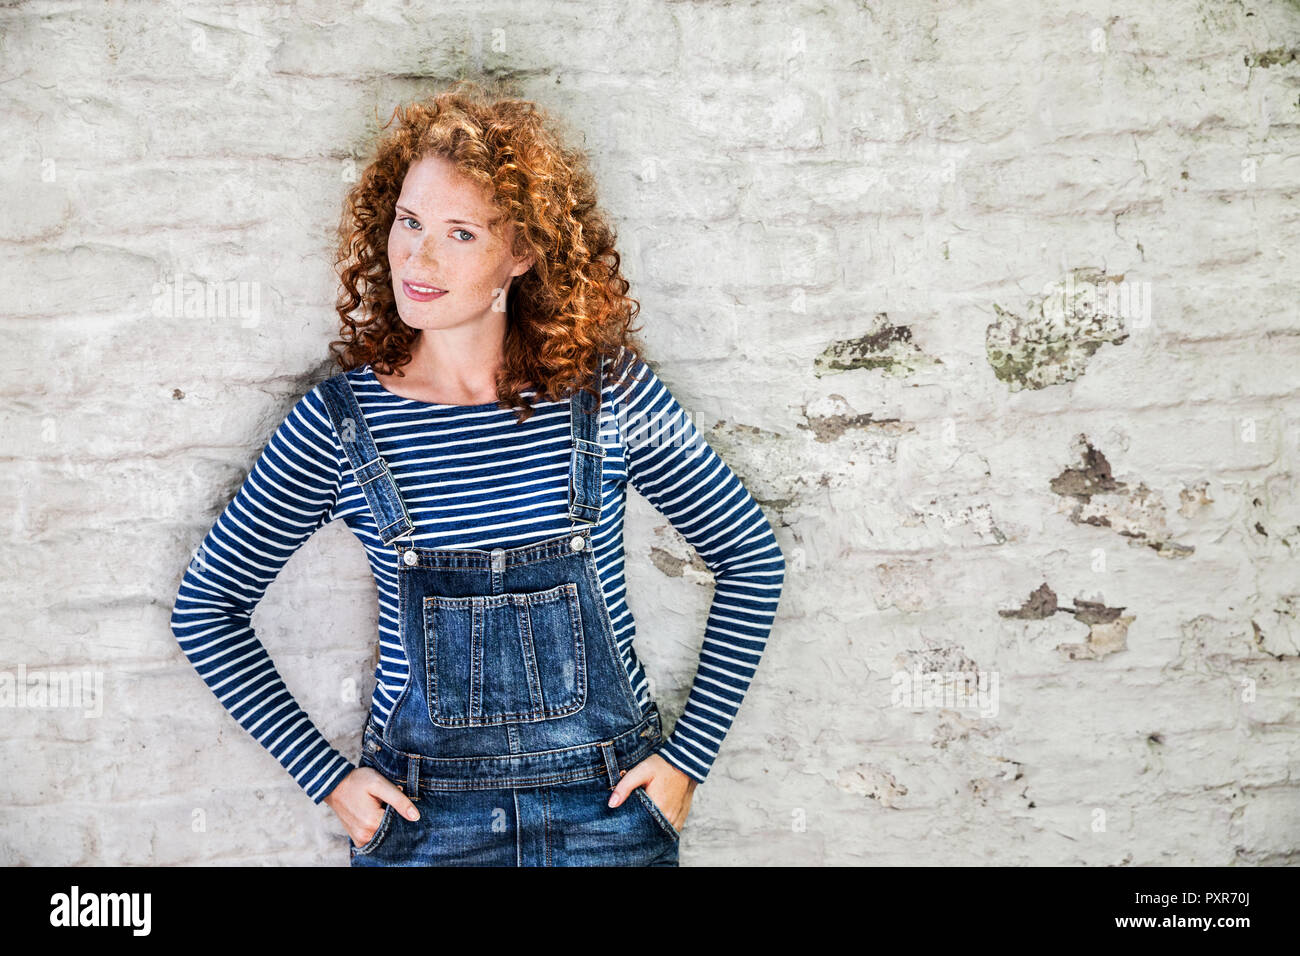 Portrait of smiling young woman wearing denim dungarees leaning against white brick wall Stock Photo